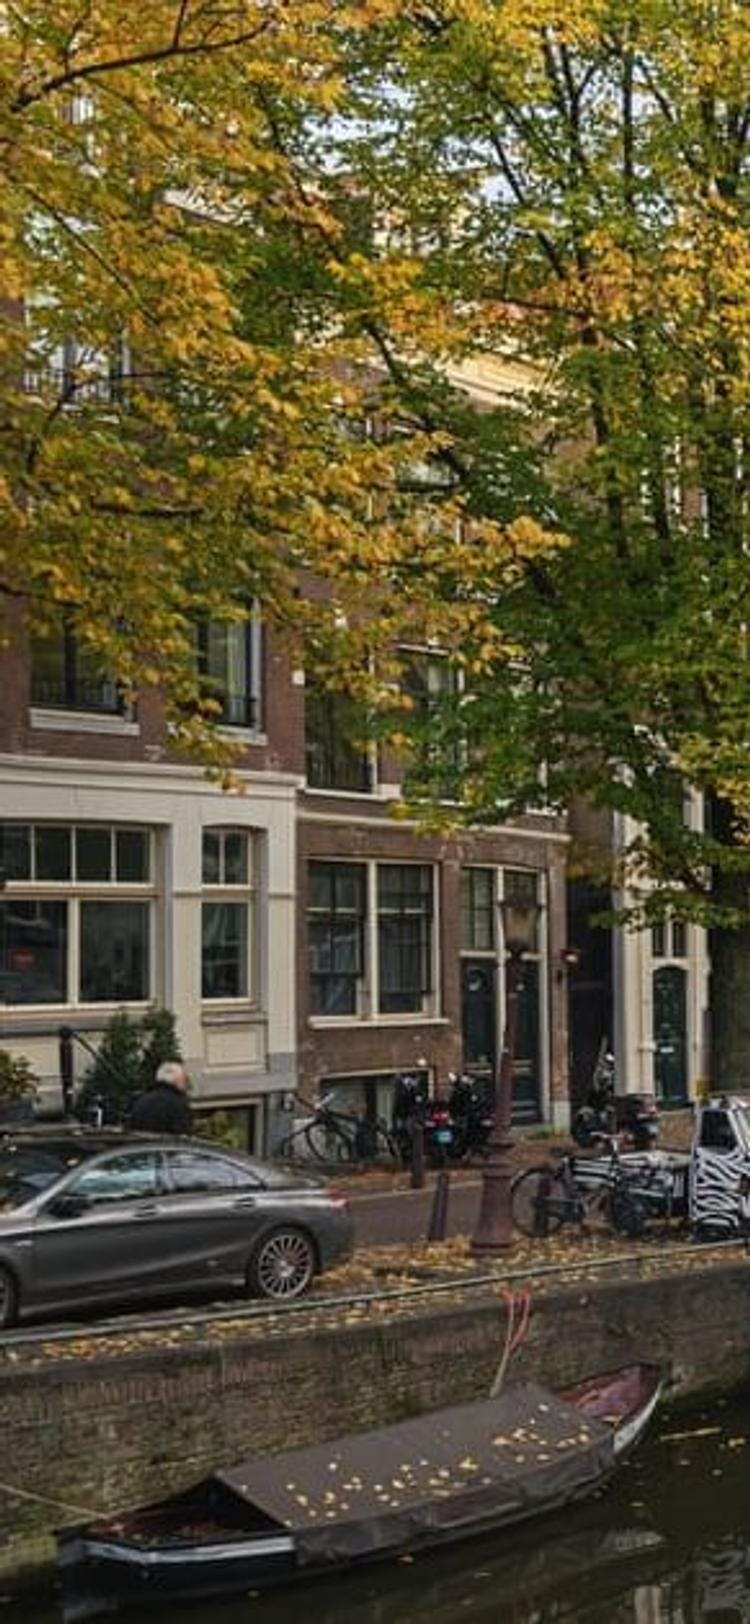 amsterdam’s green-left mayor, femke halsema, wants to ban tourists from buying weed. she said the city needs to something about crime, overtourism, and its image. the guardian said the response is mixed